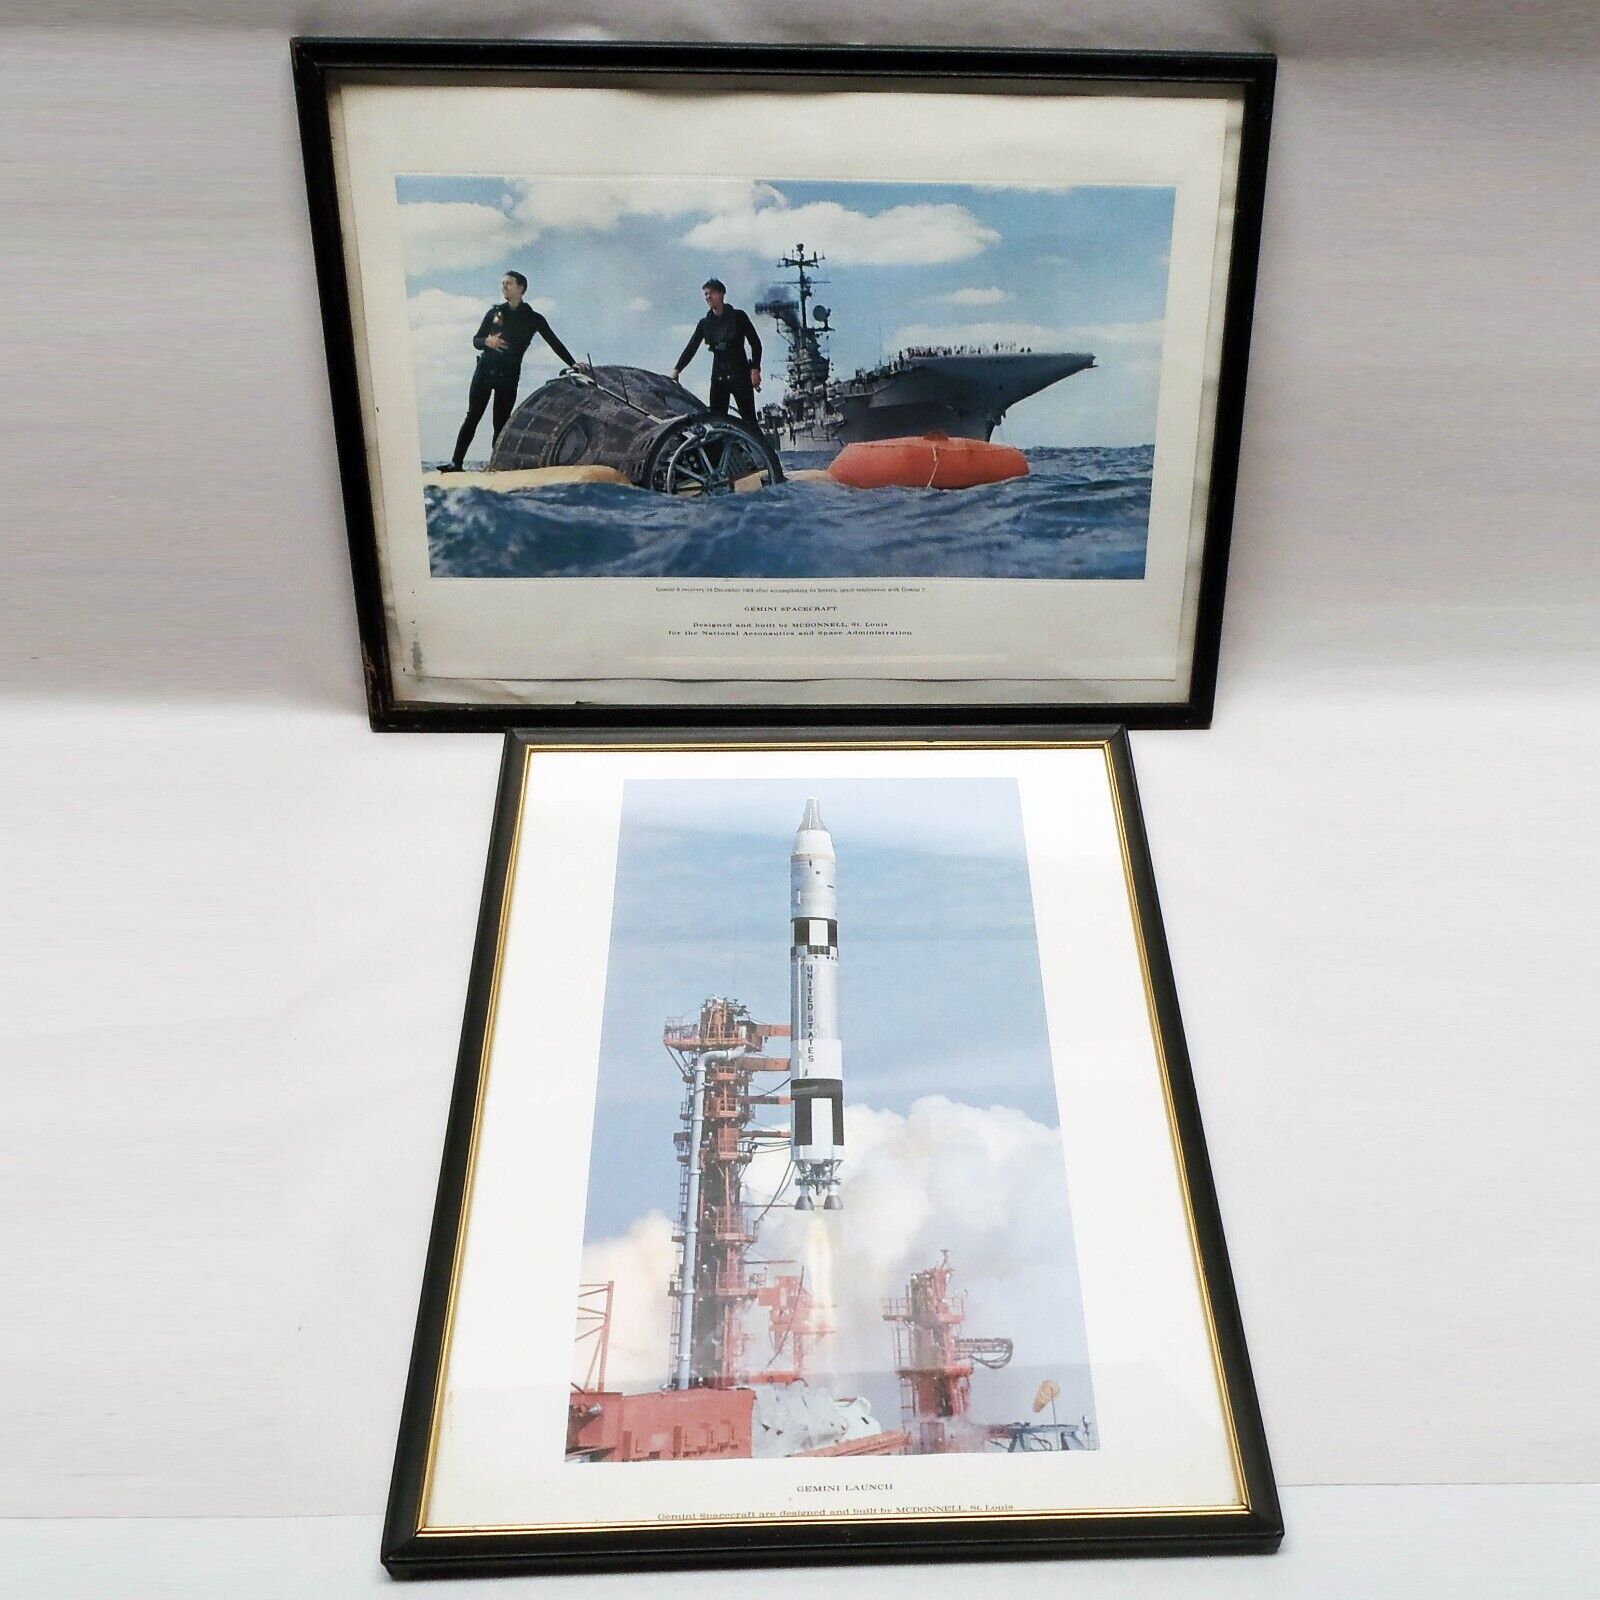 1965 NASA GEMINI SPACECRAFT & LAUNCH Framed McDonnell Aircraft Poster Prints